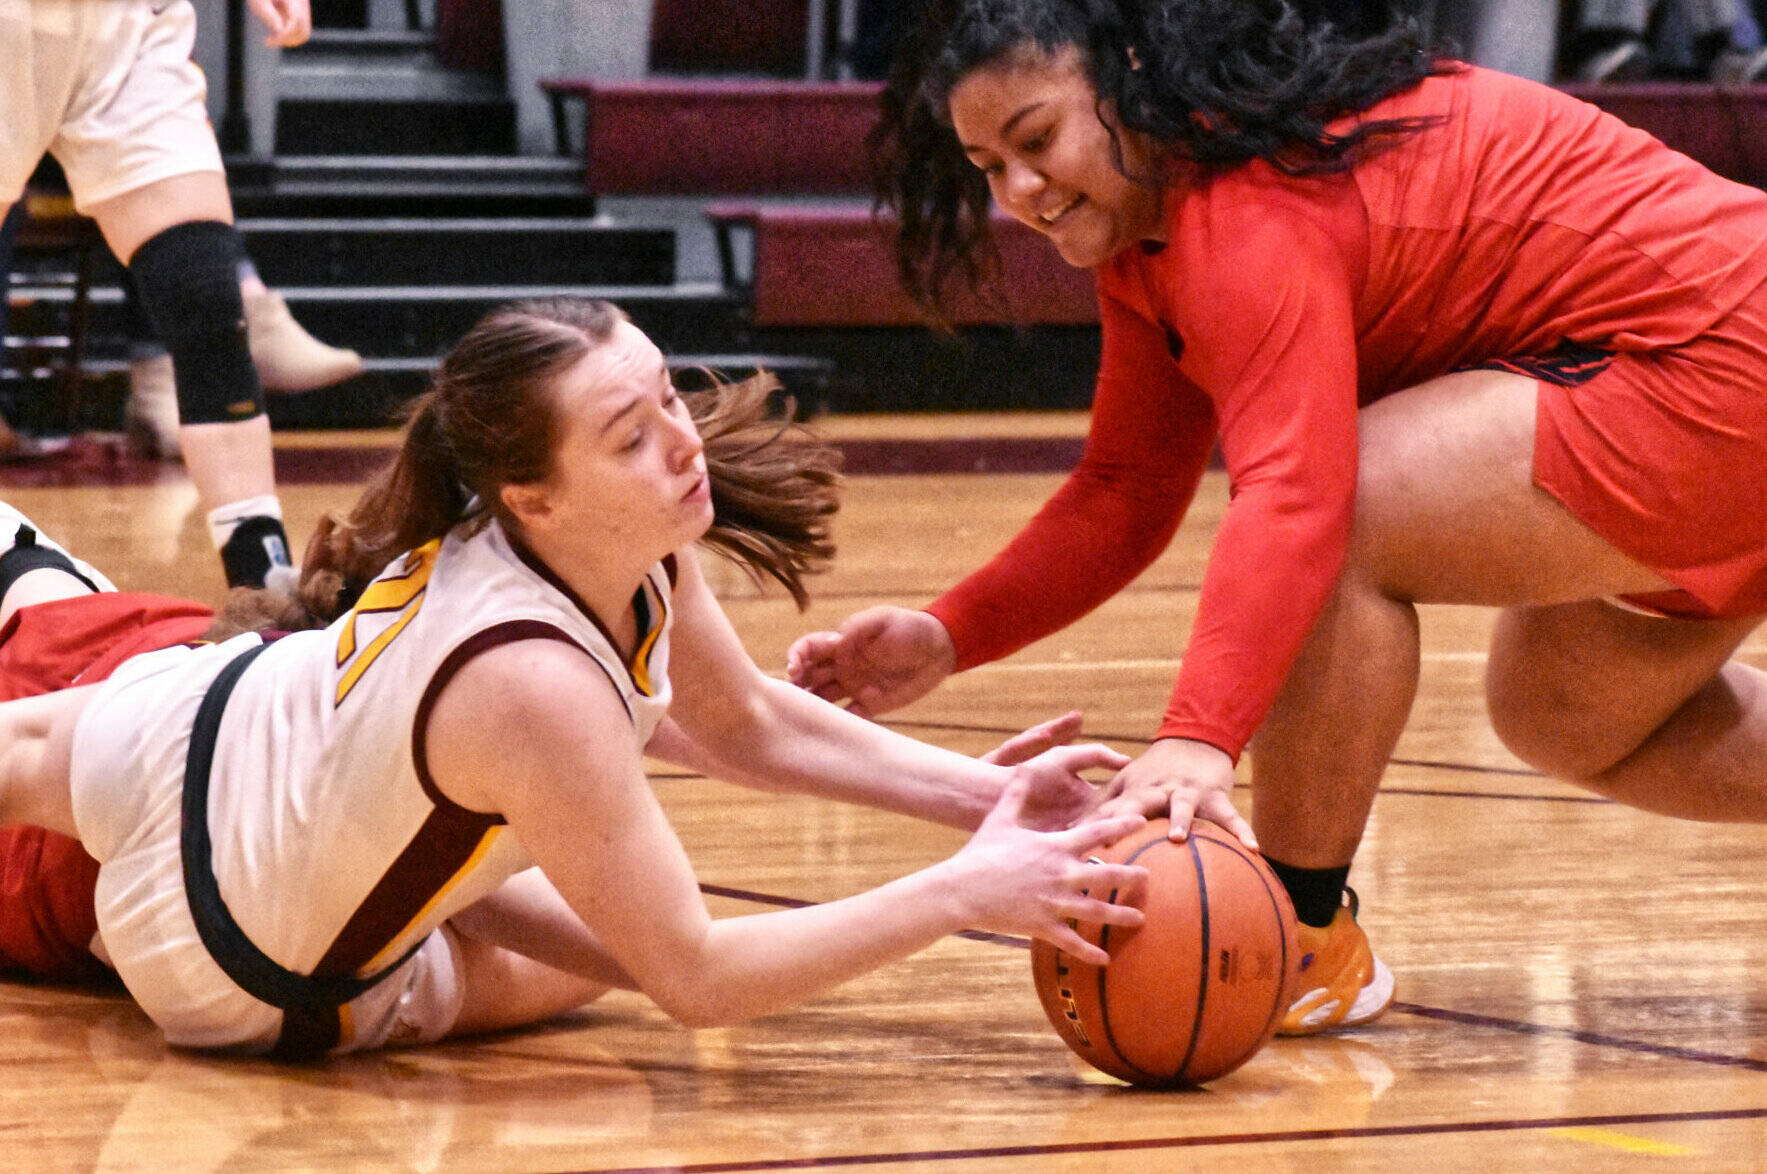 The White River High basketball teams swept their Franklin Pierce guests Friday night. The Hornet girls opened the hoop doubleheader with a lopsided 65-17 victory and the boys followed with a 77-62 win. Pictured is White River’s Ava Bright hitting the floor during a scramble for a loose ball. Photo by Kevin Hanson